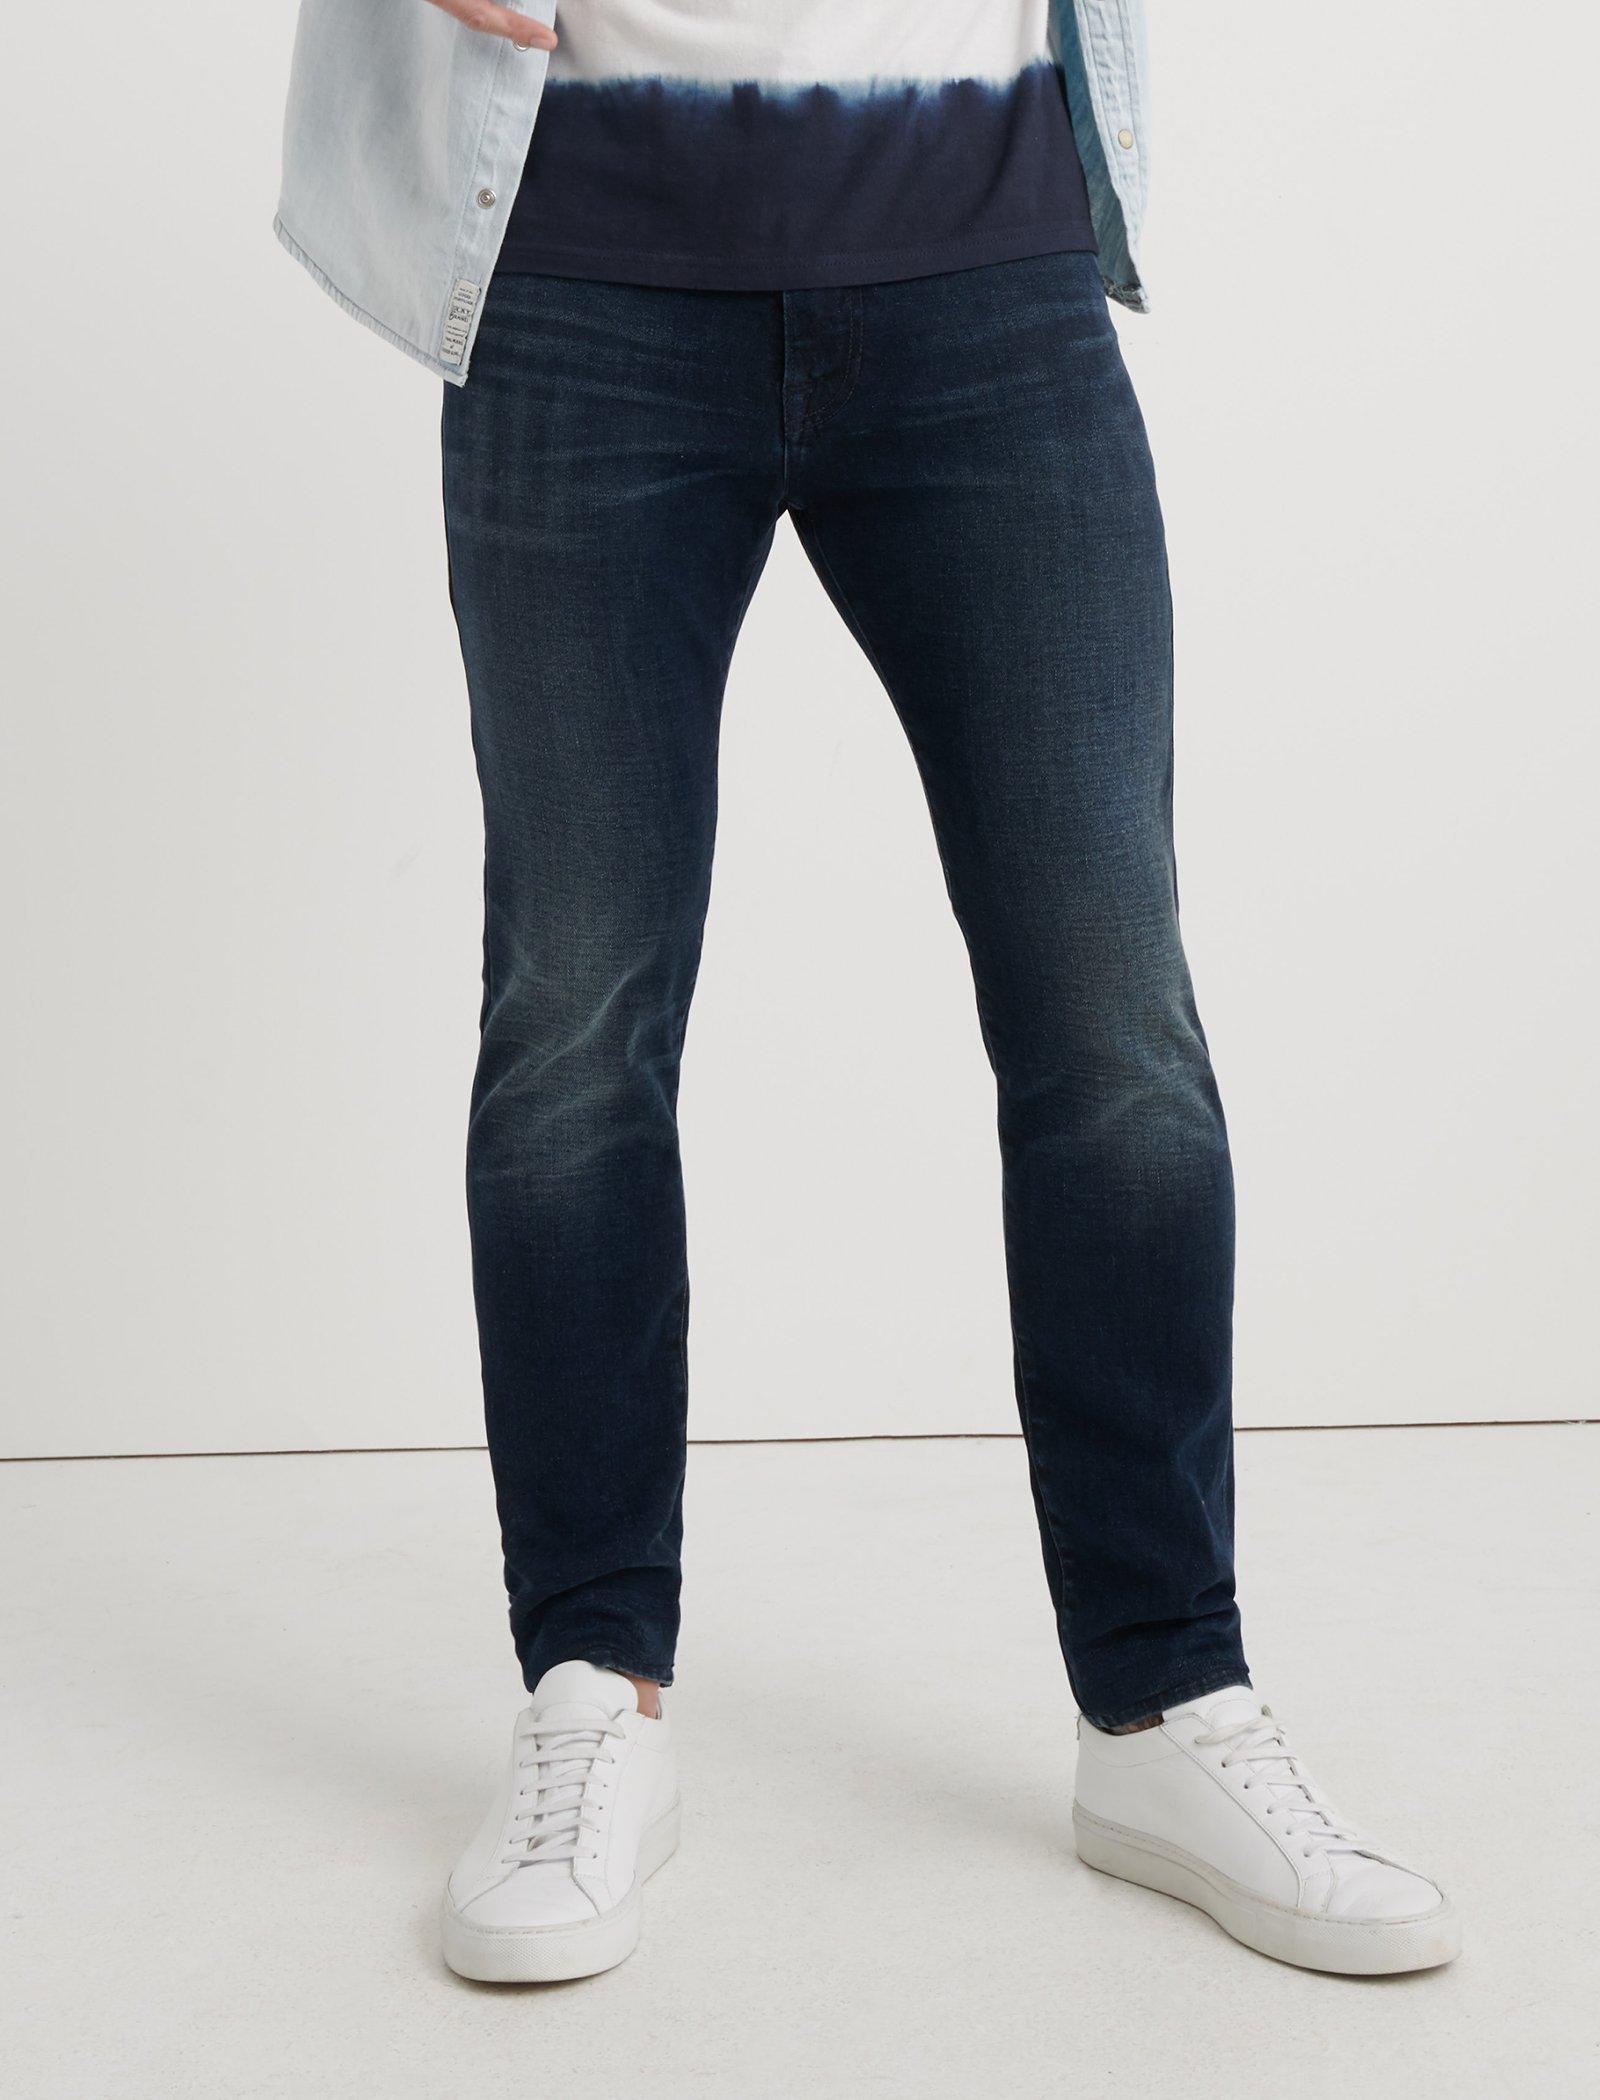 mens tapered jean